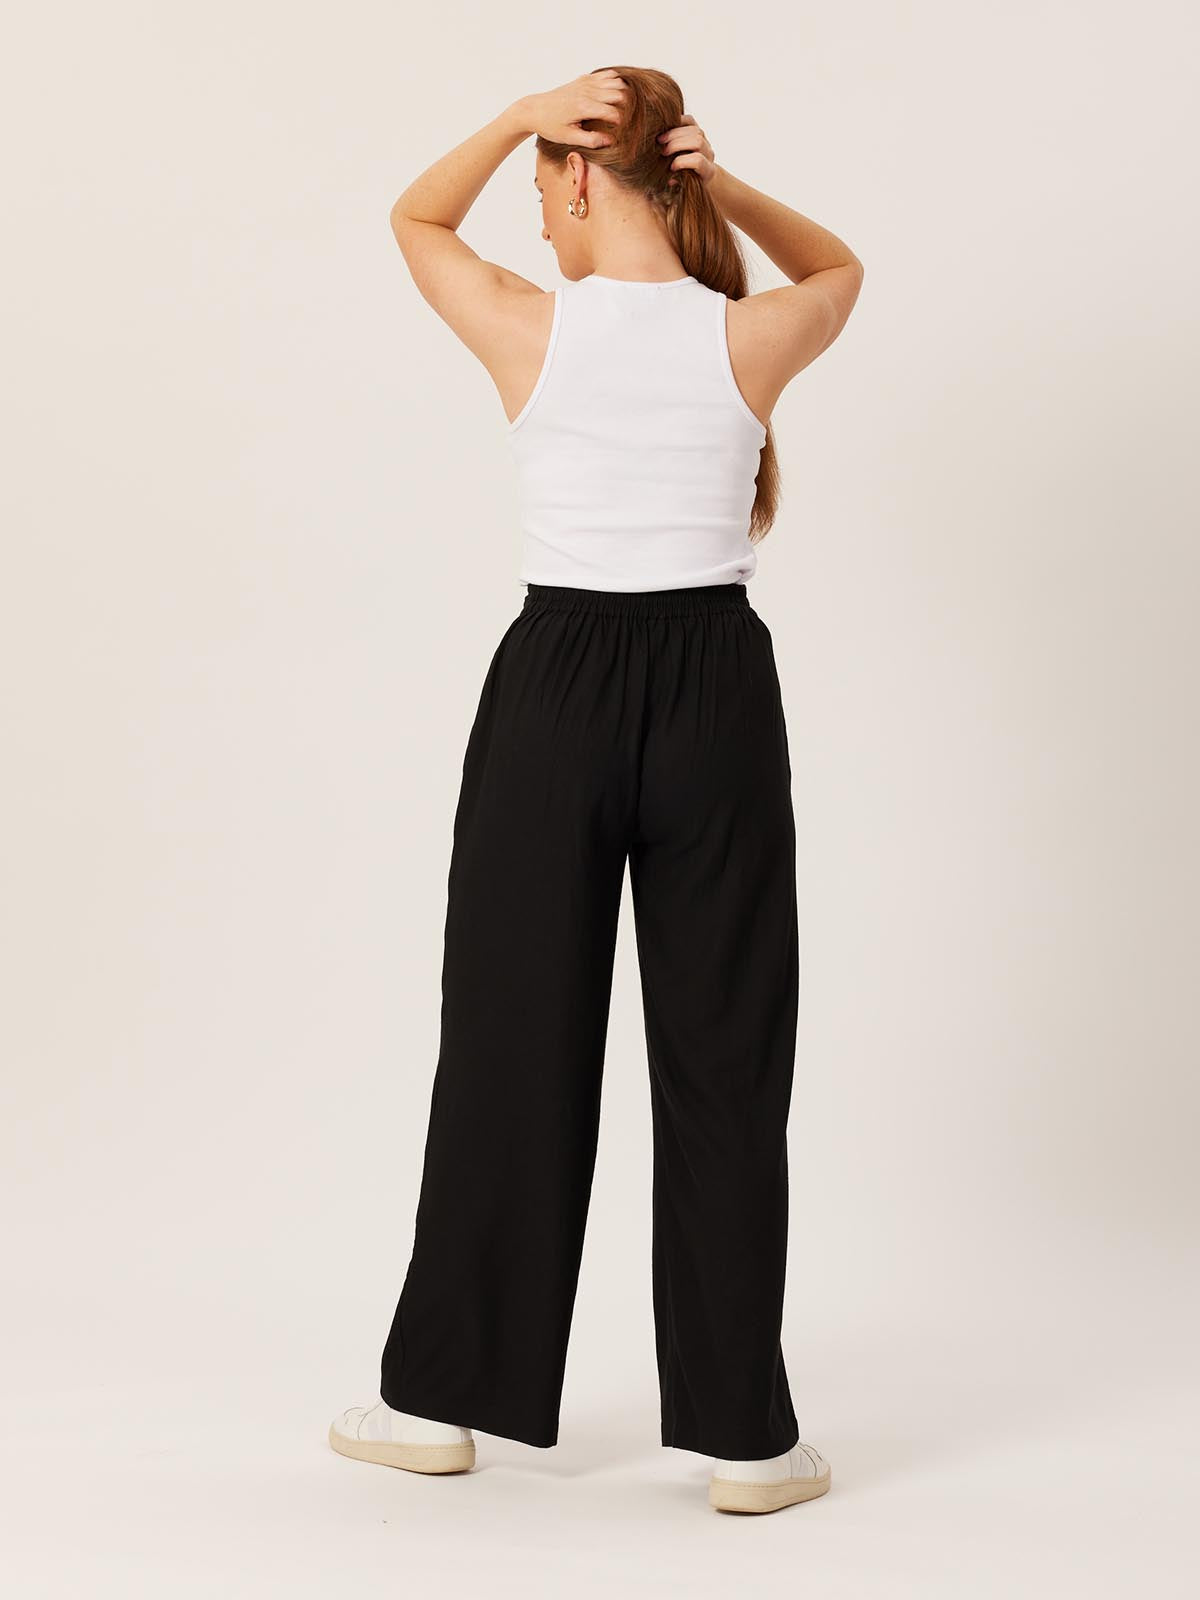 Model wearing the Lana sustainable trousers in black, pictured from the back pulling their hair to one side